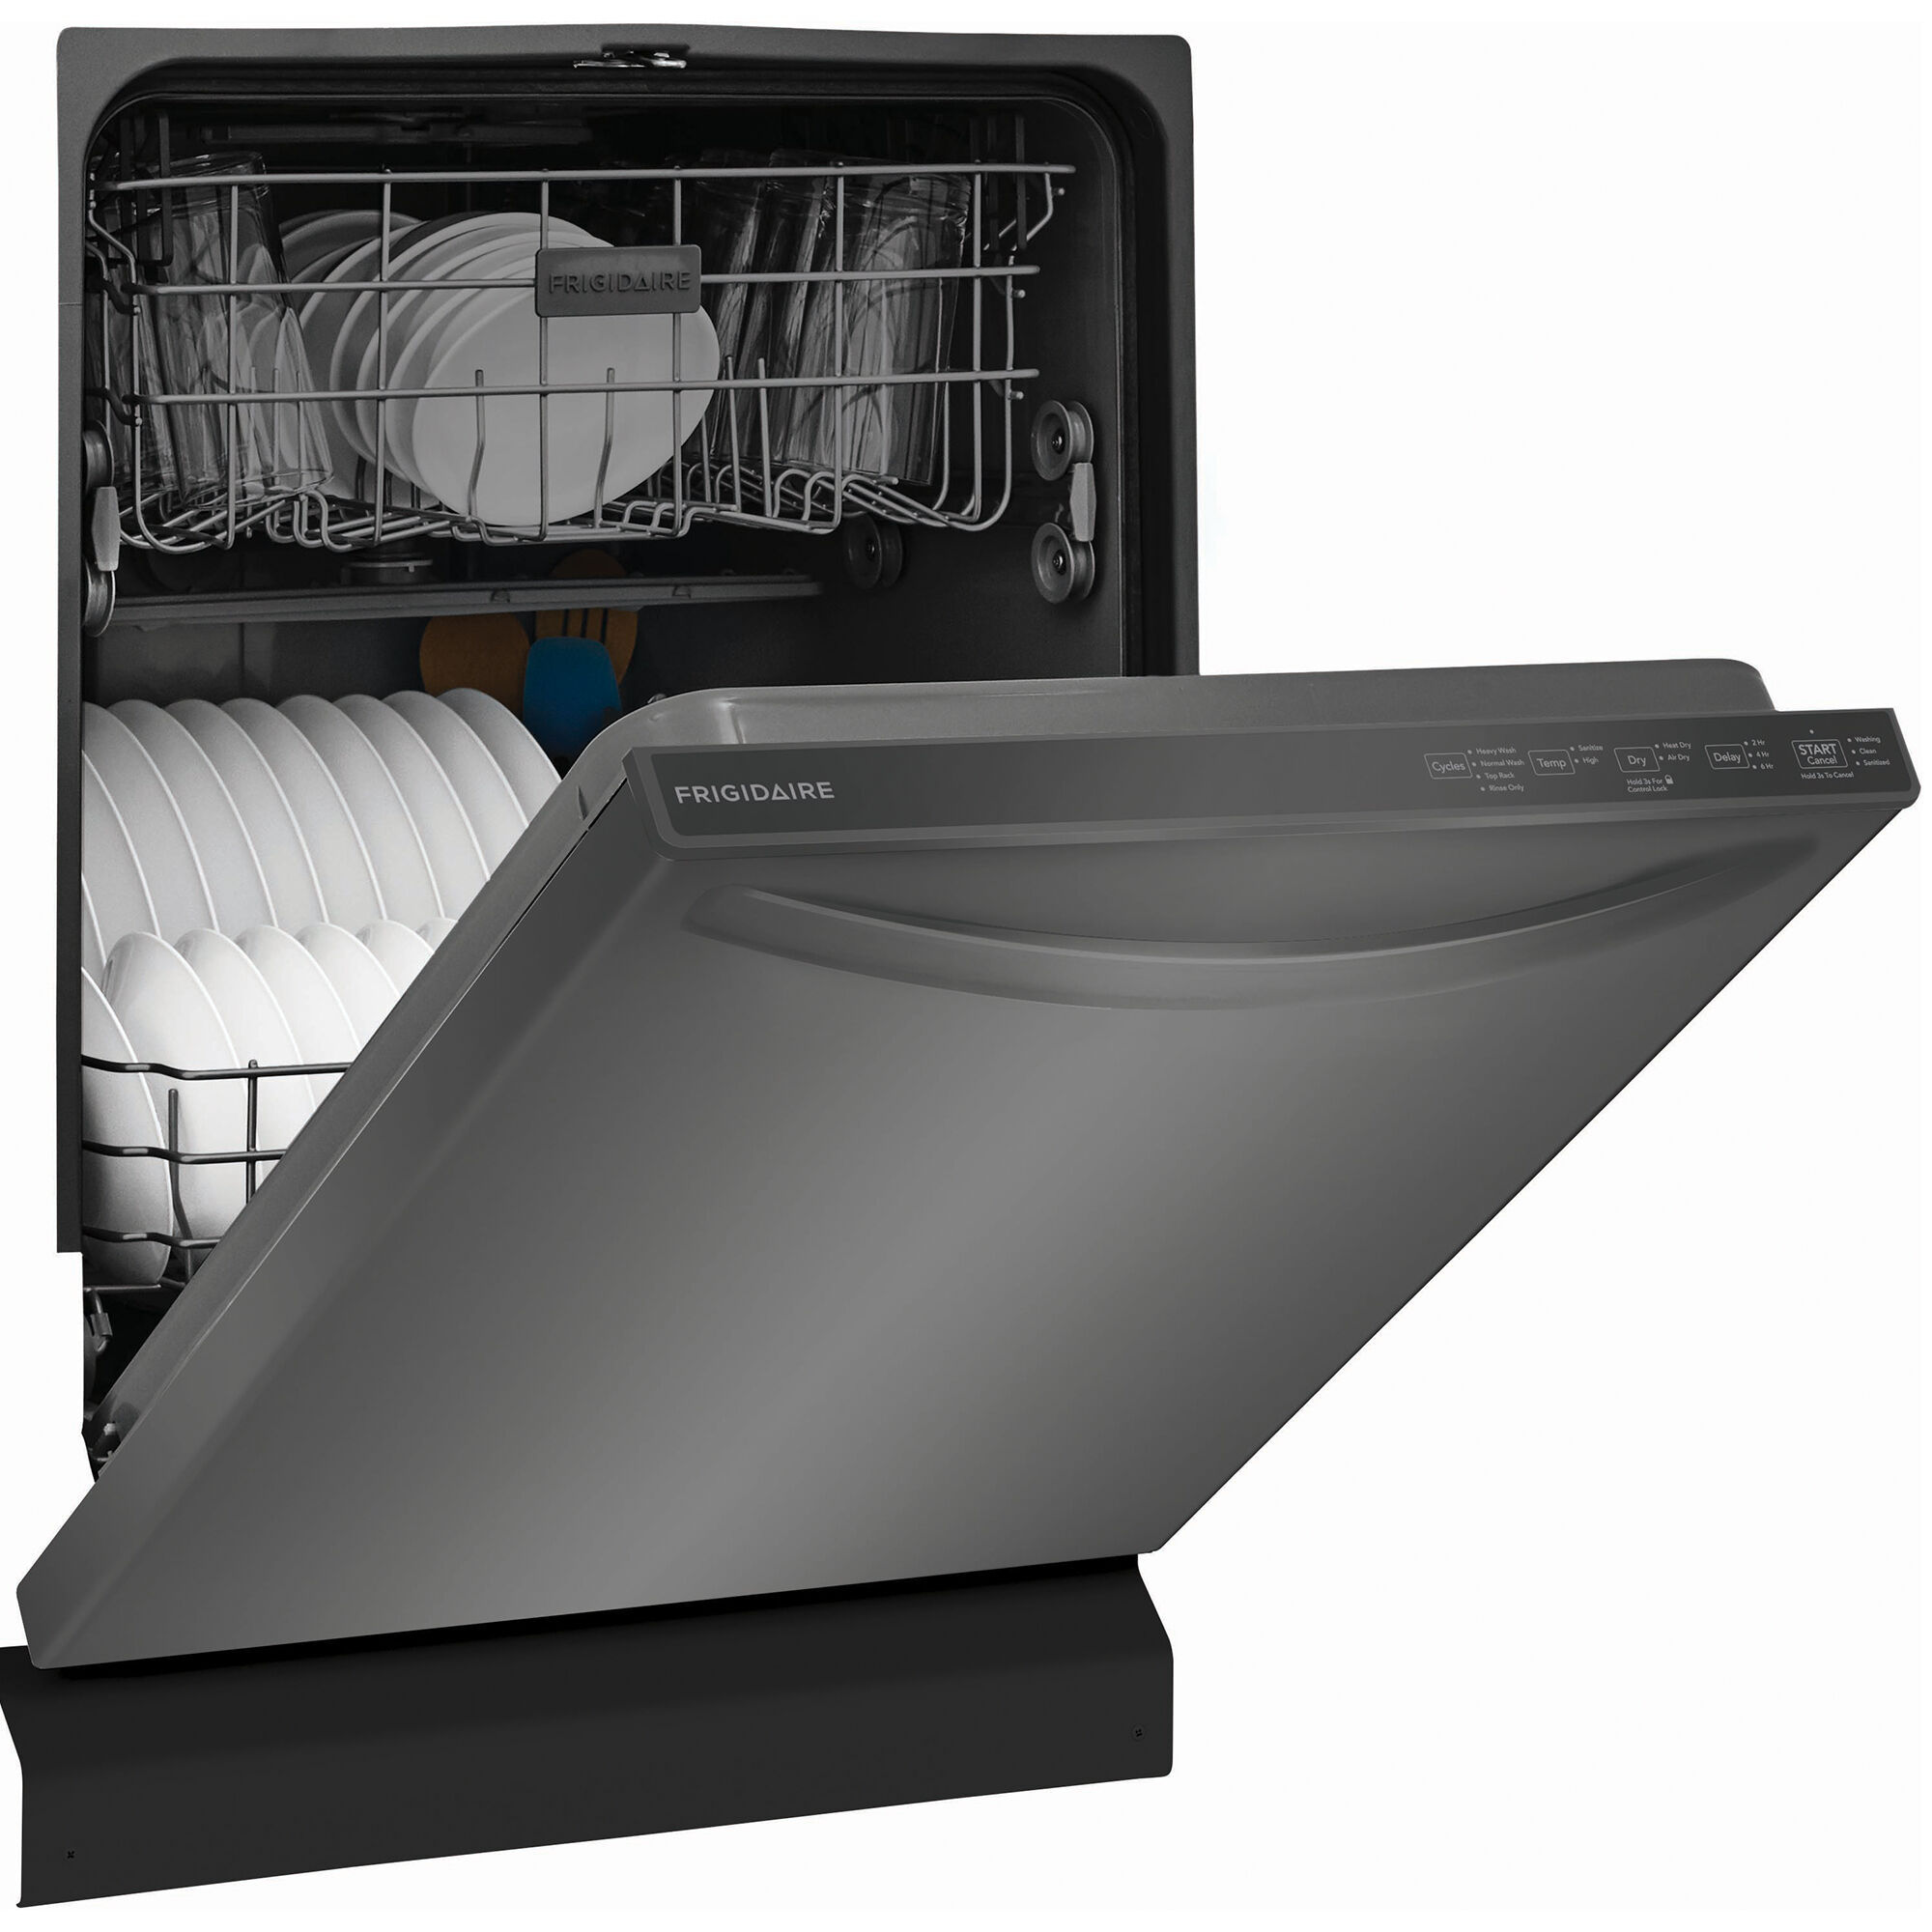 Frigidaire 24 in. Built-In Dishwasher with Top Control, 52 dBA Sound Level,  14 Place Settings, 4 Wash Cycles & Sanitize Cycle - Black Stainless Steel